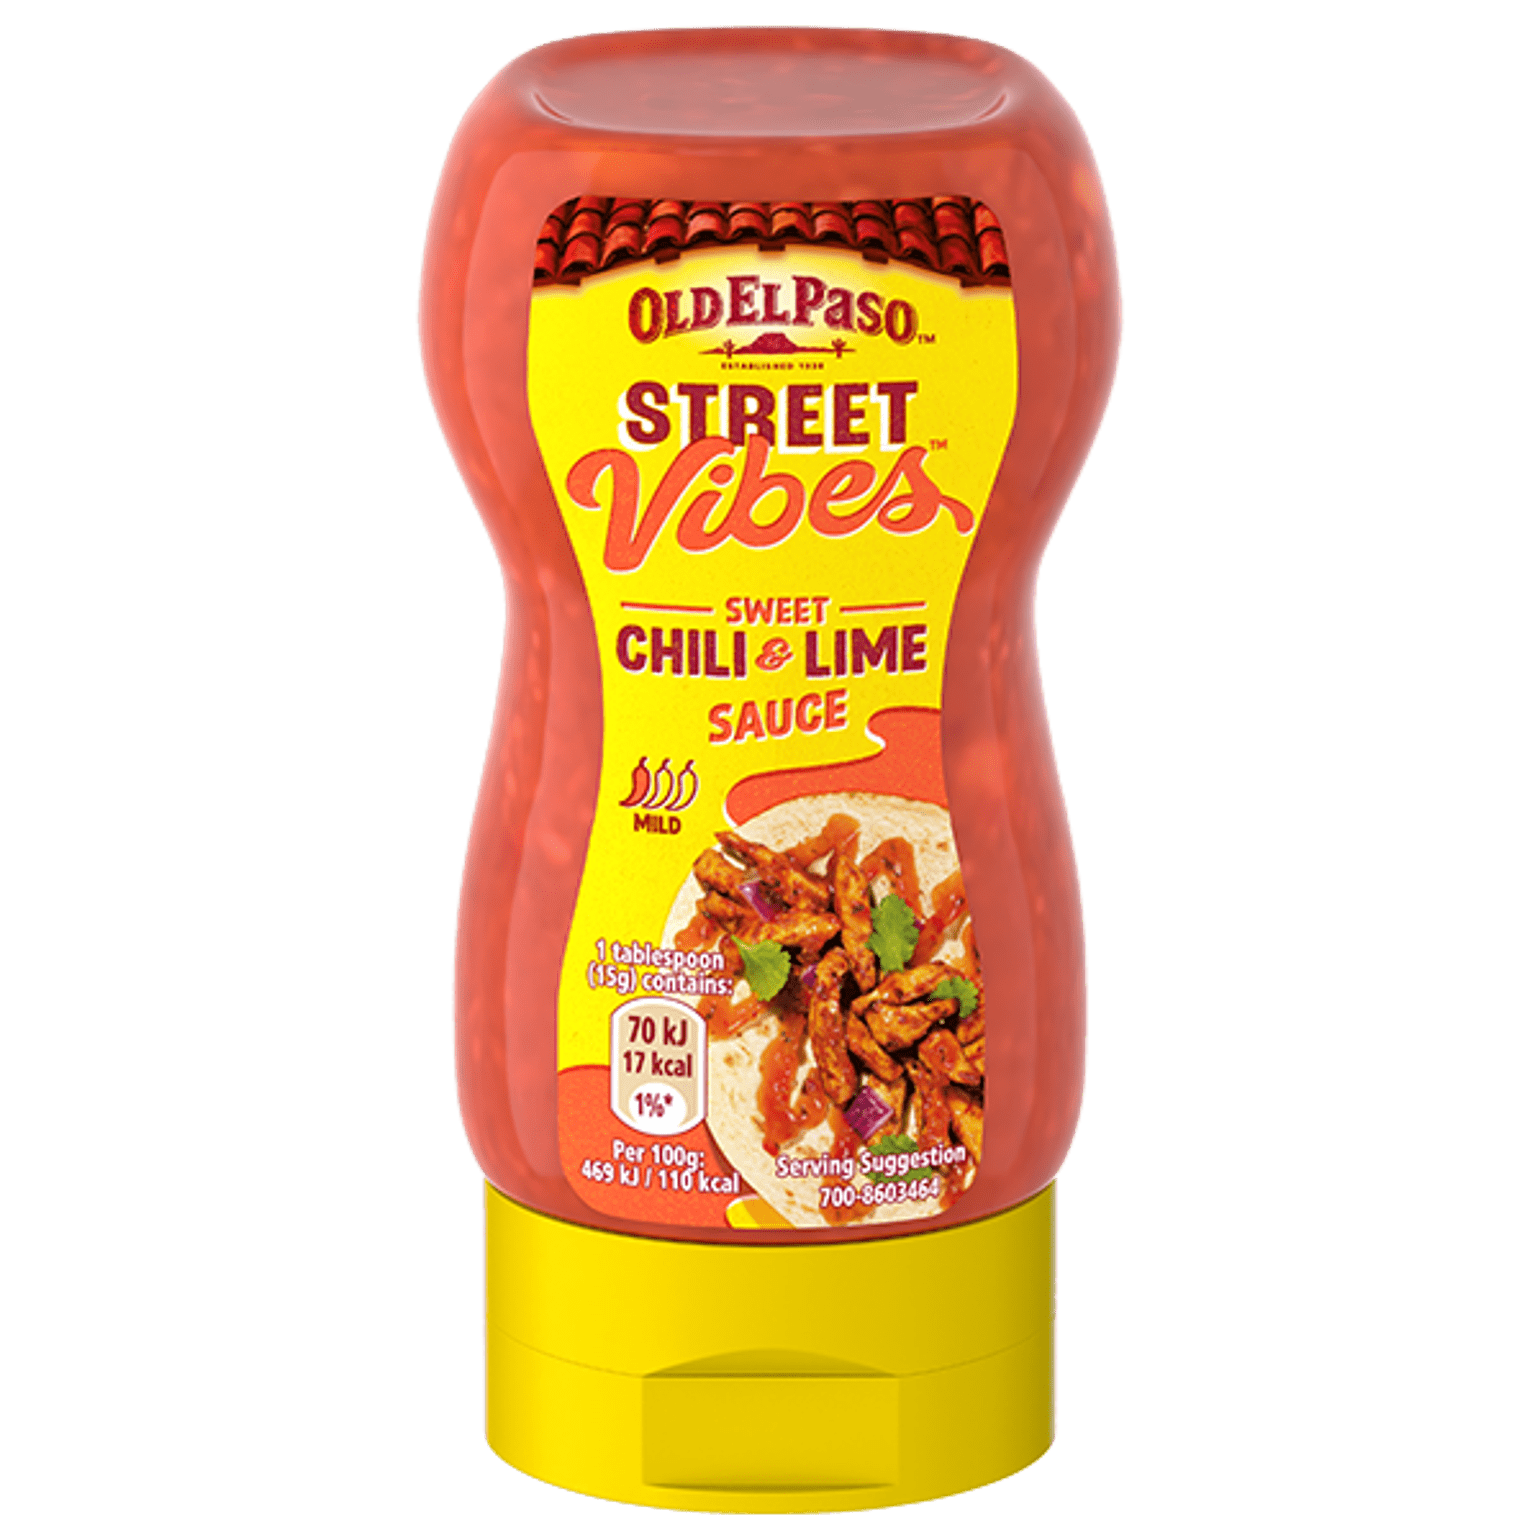 A bottle of Old El Paso Street Vibes Sweet Chili and Lime Sauce 255g